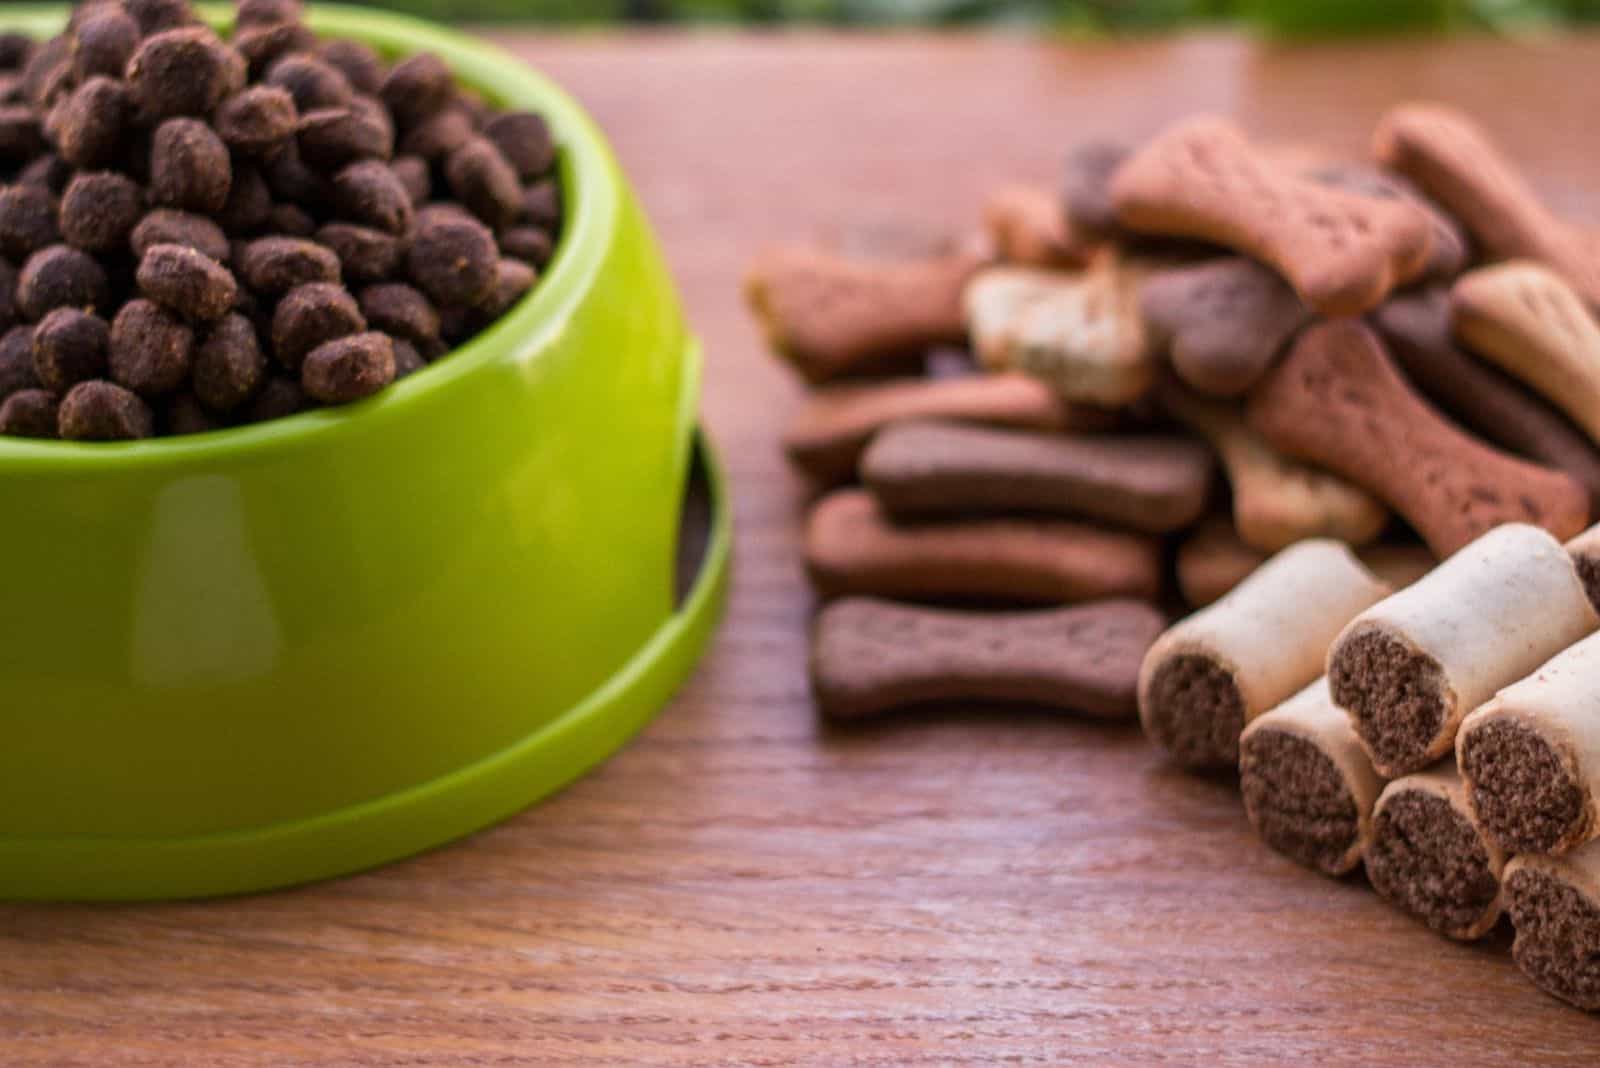 dog food and cookies on a wooden table